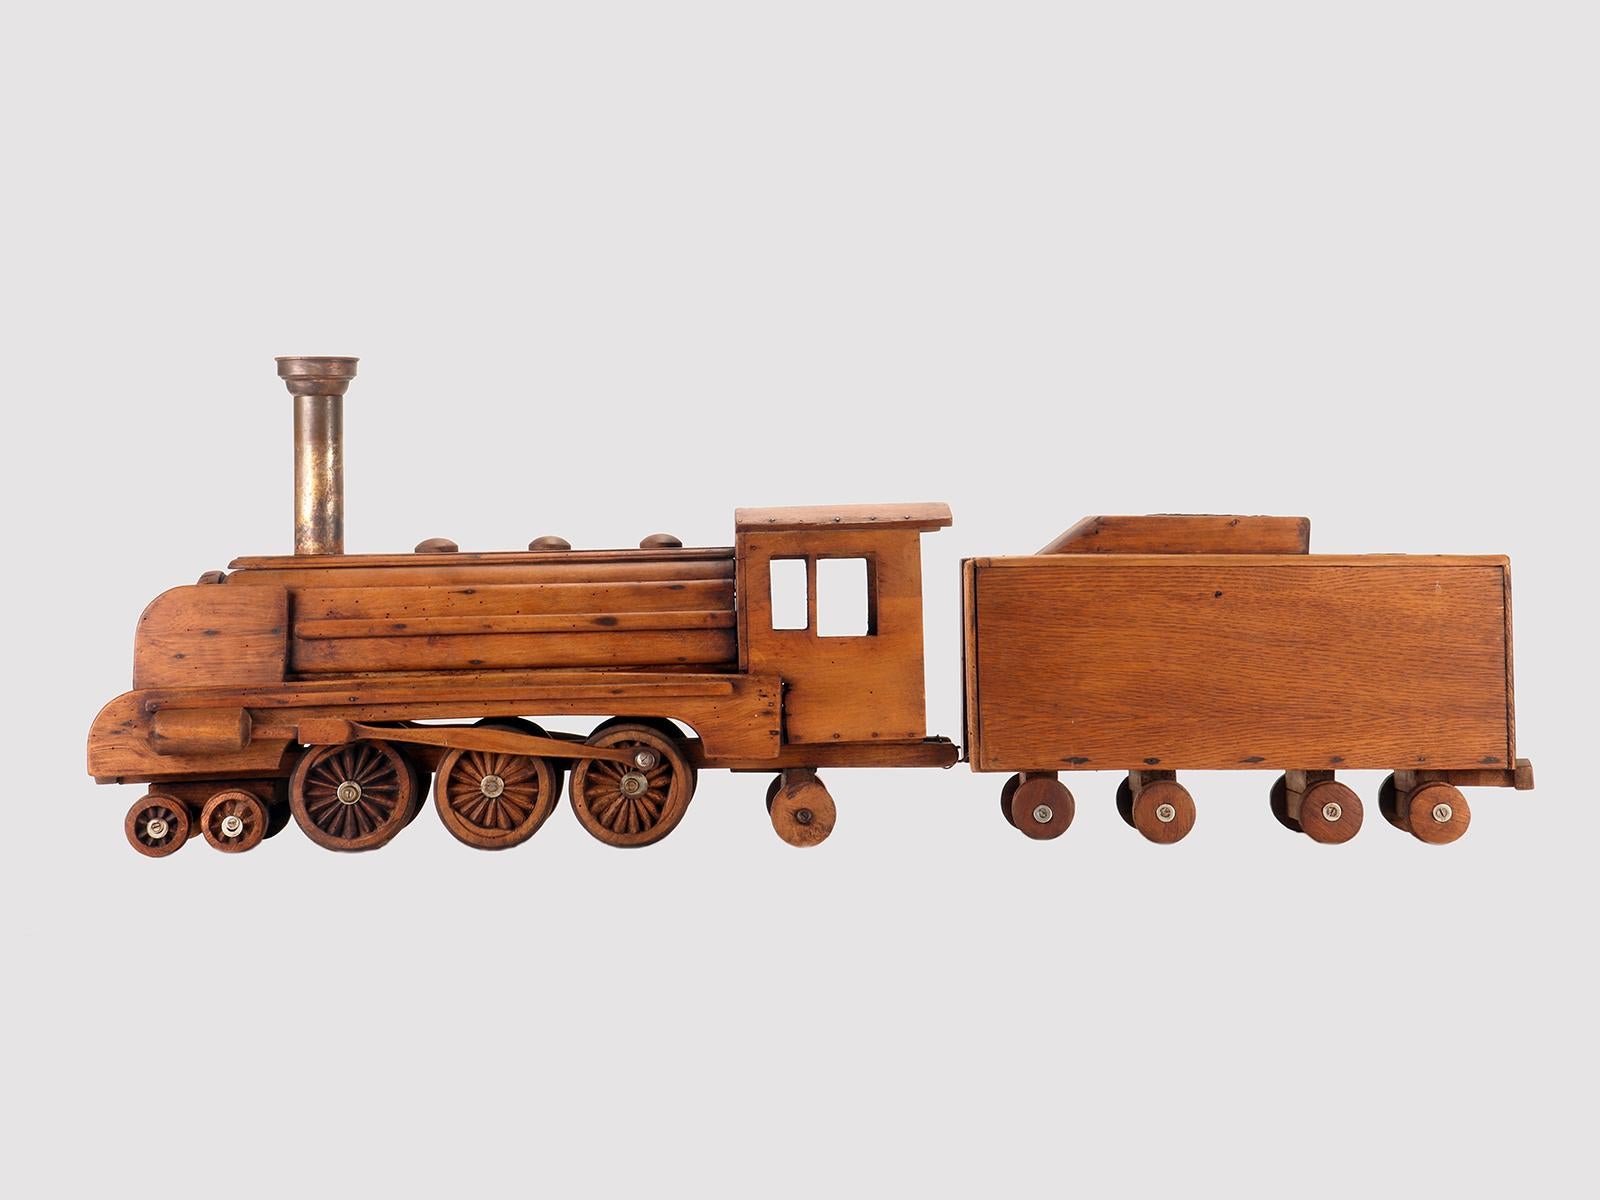 A toy model of Folk art, steam train, consisting of two elements, the locomotive and a coal wagon. Made of oak wood with metal details. the chimney, like the round elements that run in the upper part, is made of brass with traces of gilding. Wooden